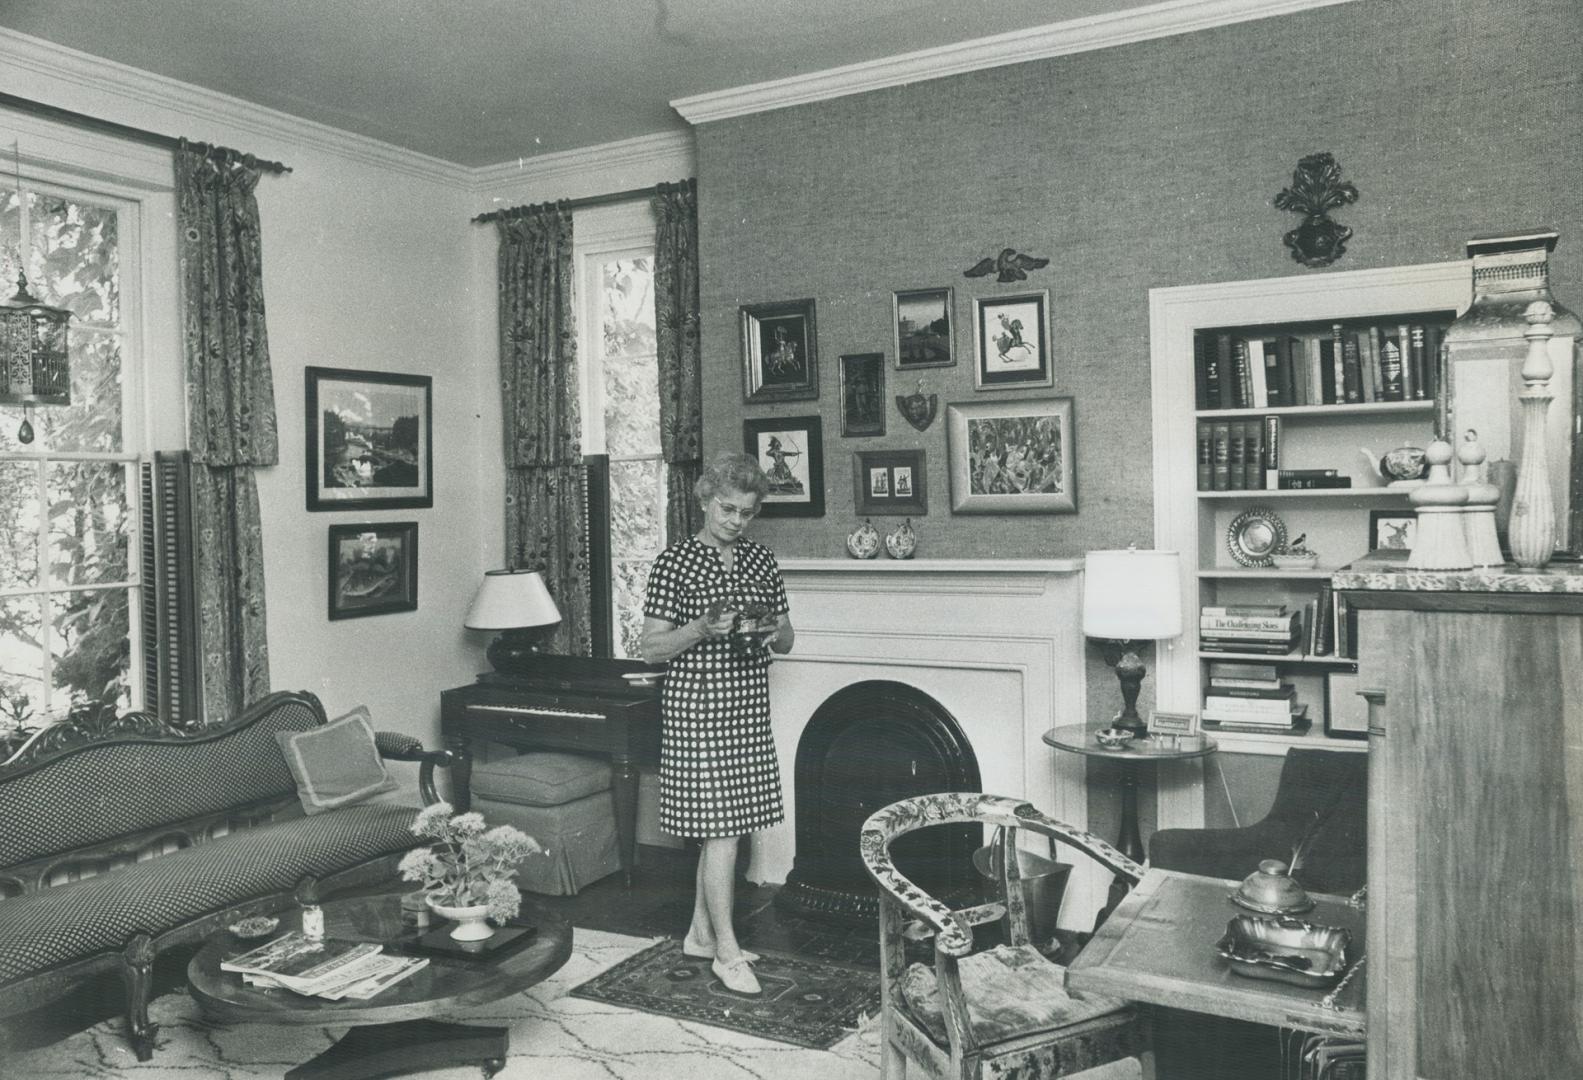 Mrs. Wilder breckenridge stands in front of the fireplace in Cantley House, built as a cottage in 1838 and enlarged to two storeys in the 1850s. It is(...)